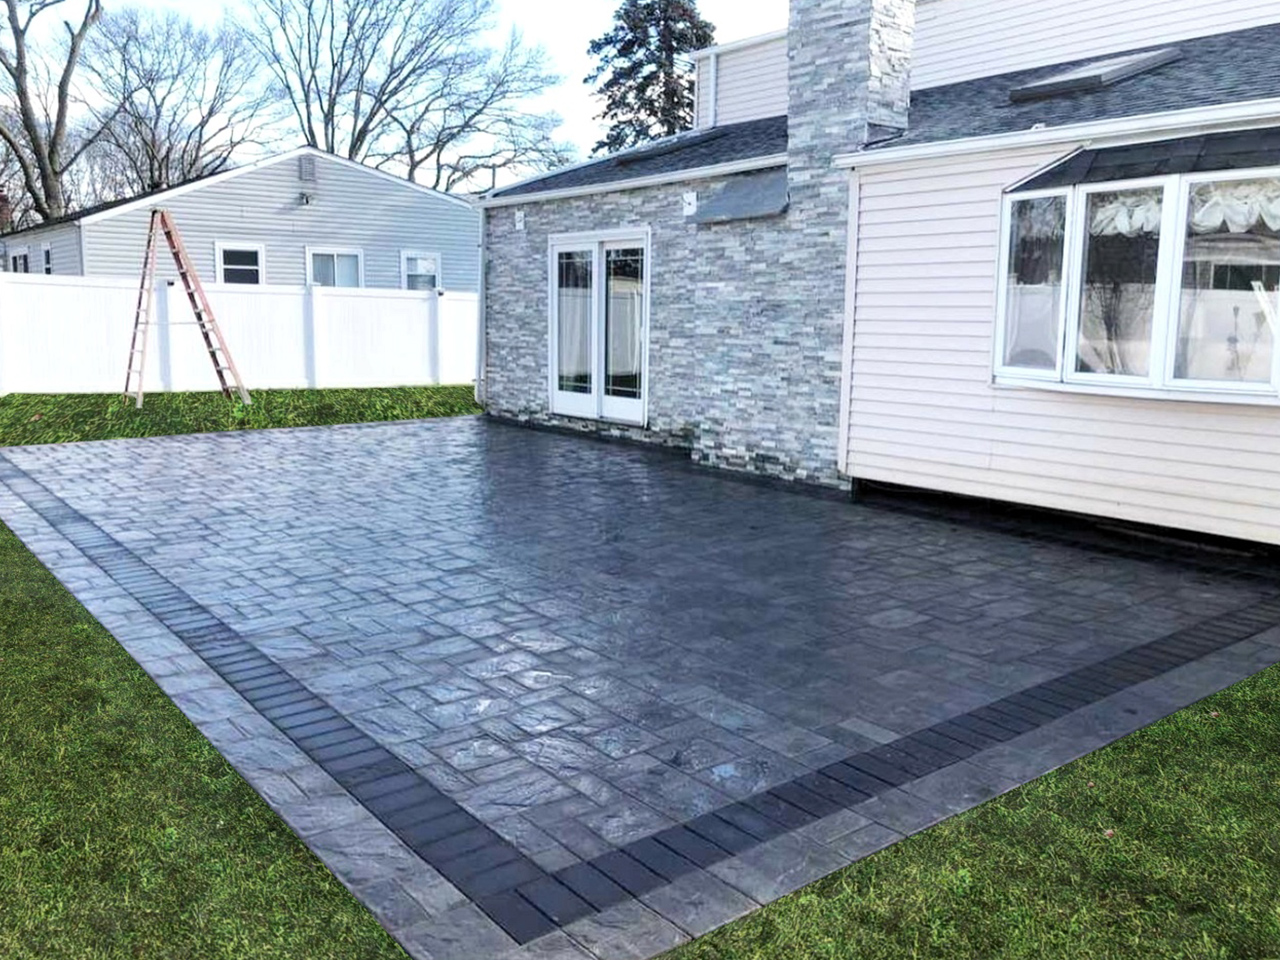 A patio project showcasing Affordable Patio's passion and commitment to delivering personalized, high-quality solutions